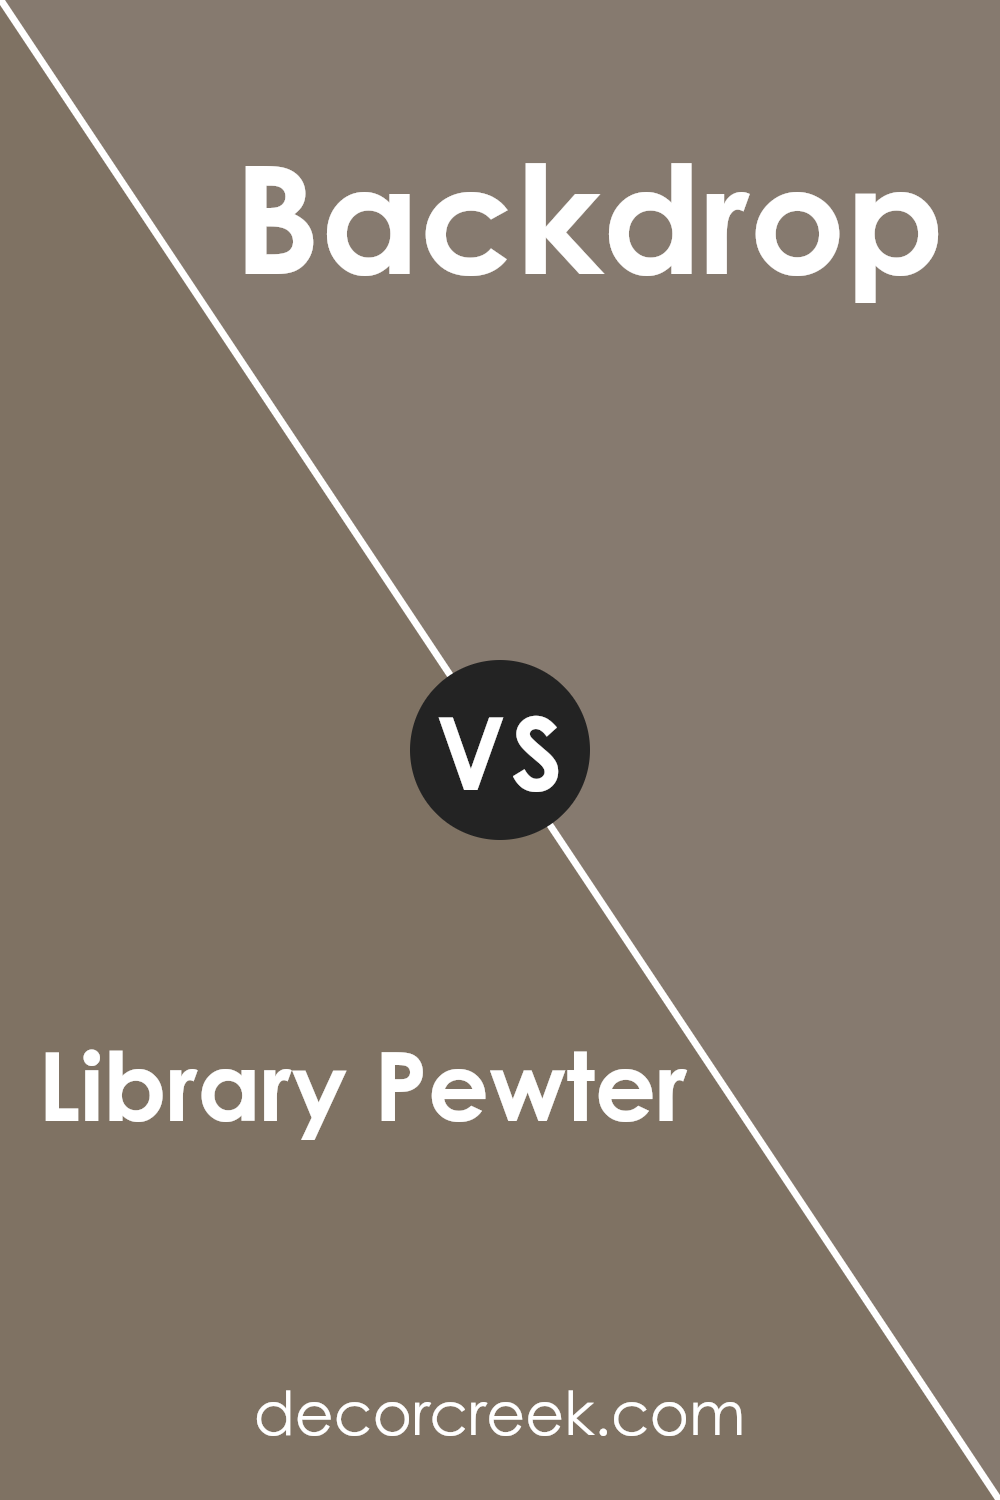 library_pewter_sw_0038_vs_backdrop_sw_7025